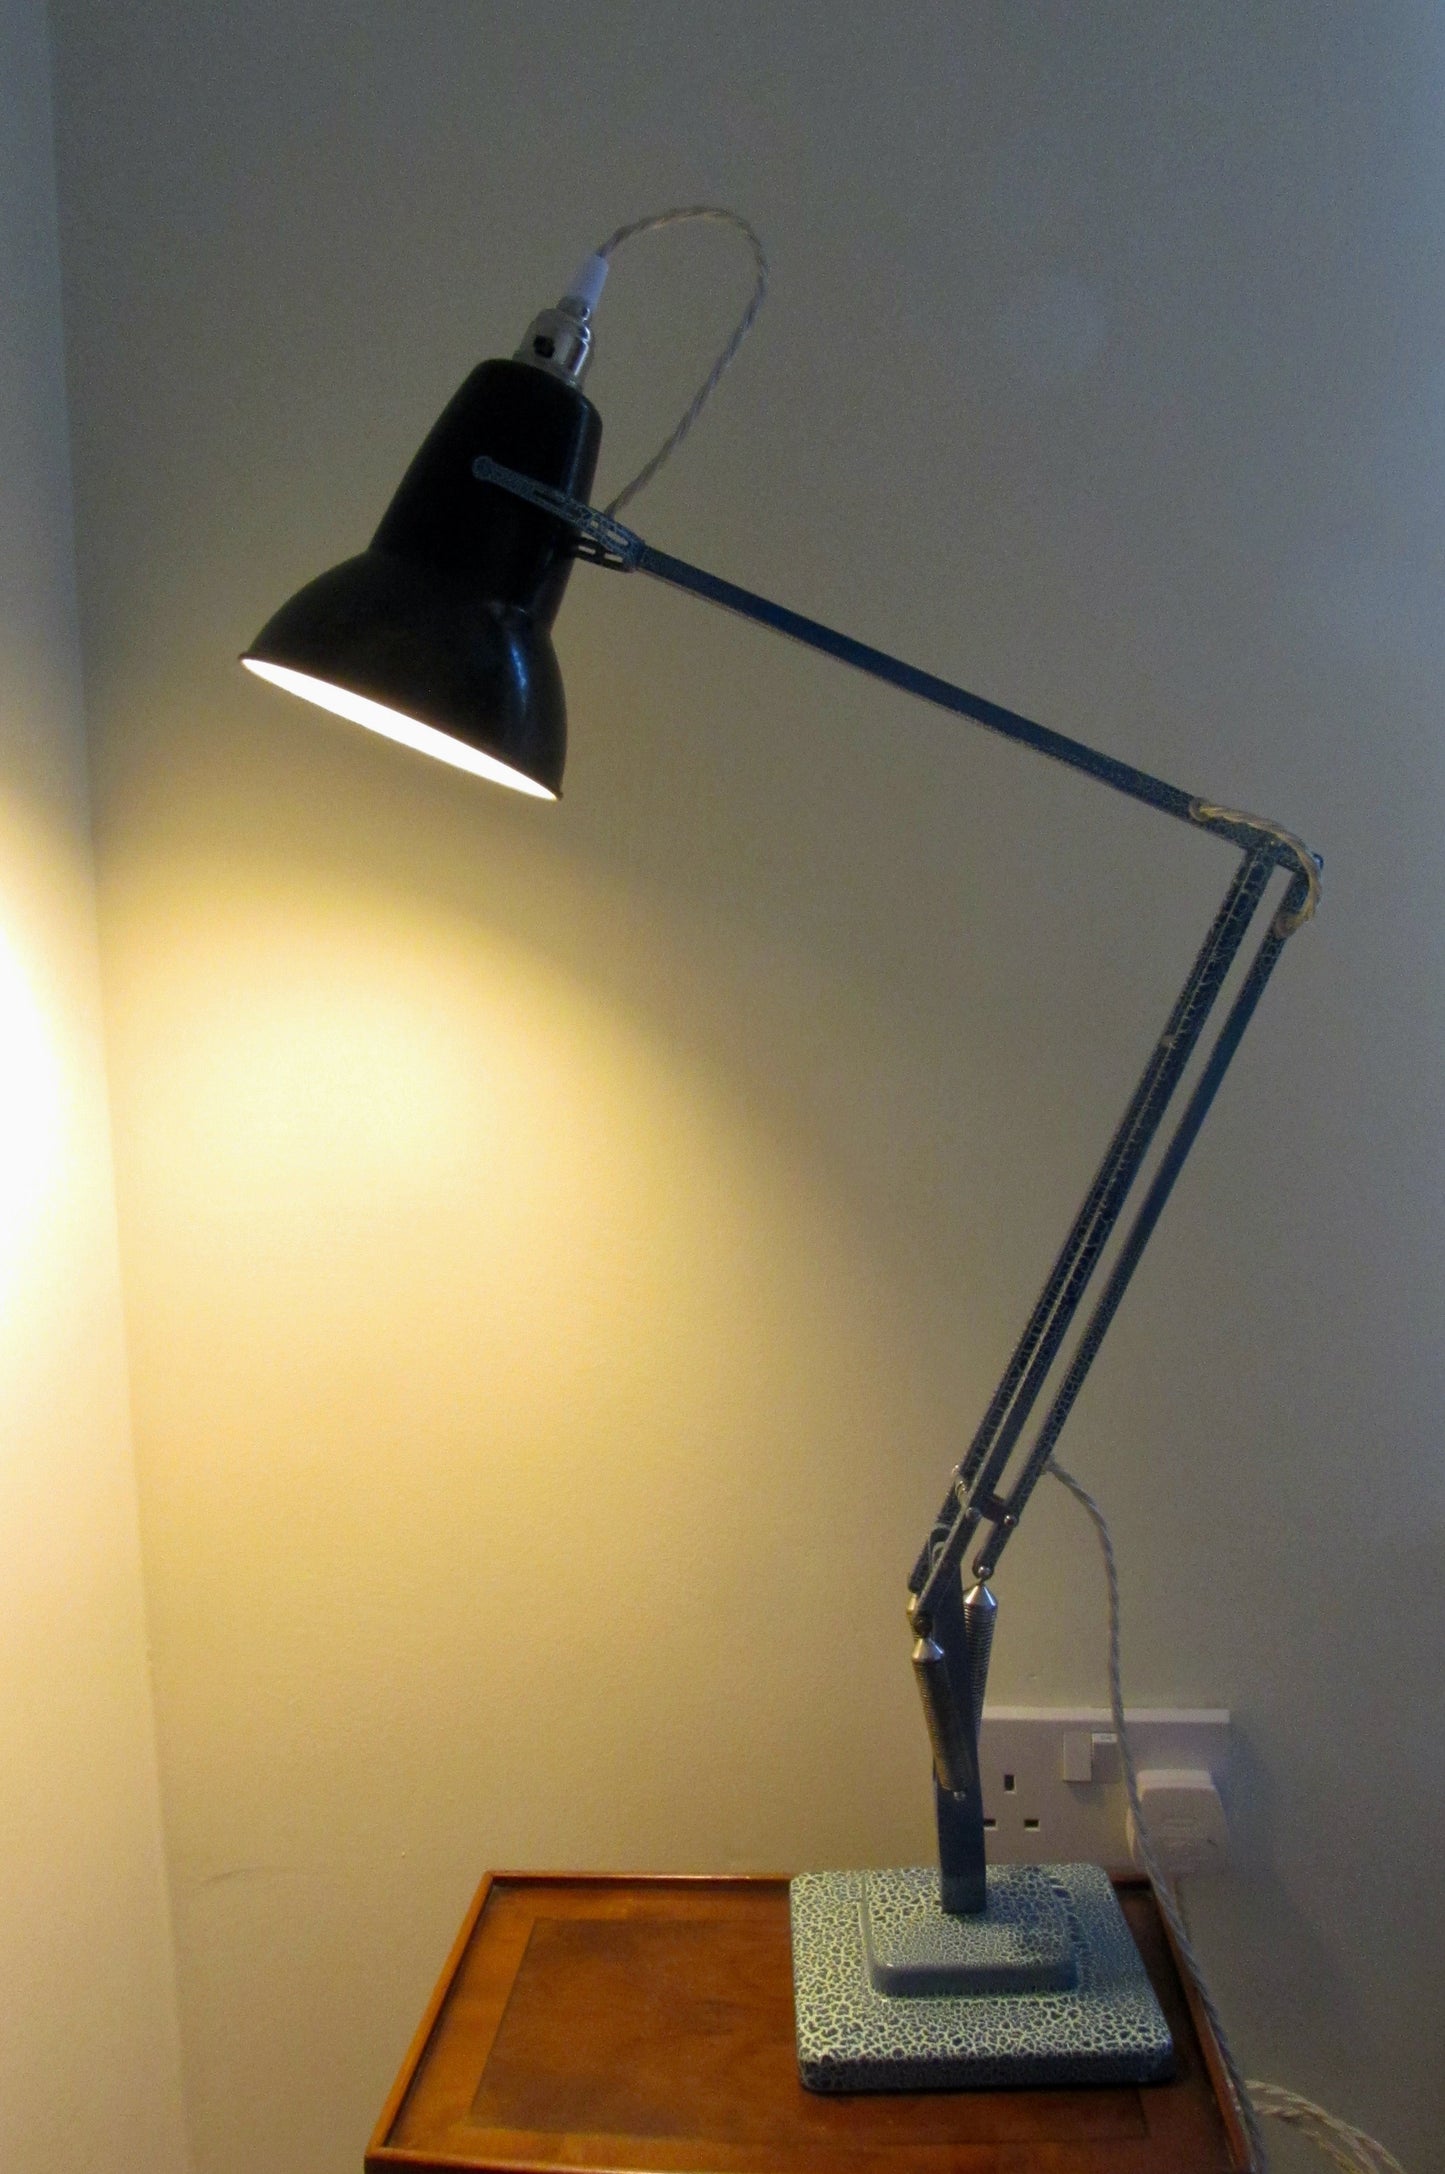 1940s Anglepoise 1227 Desk Lamp With Bakelite Shade, Crackle Glaze Paint And White Flex